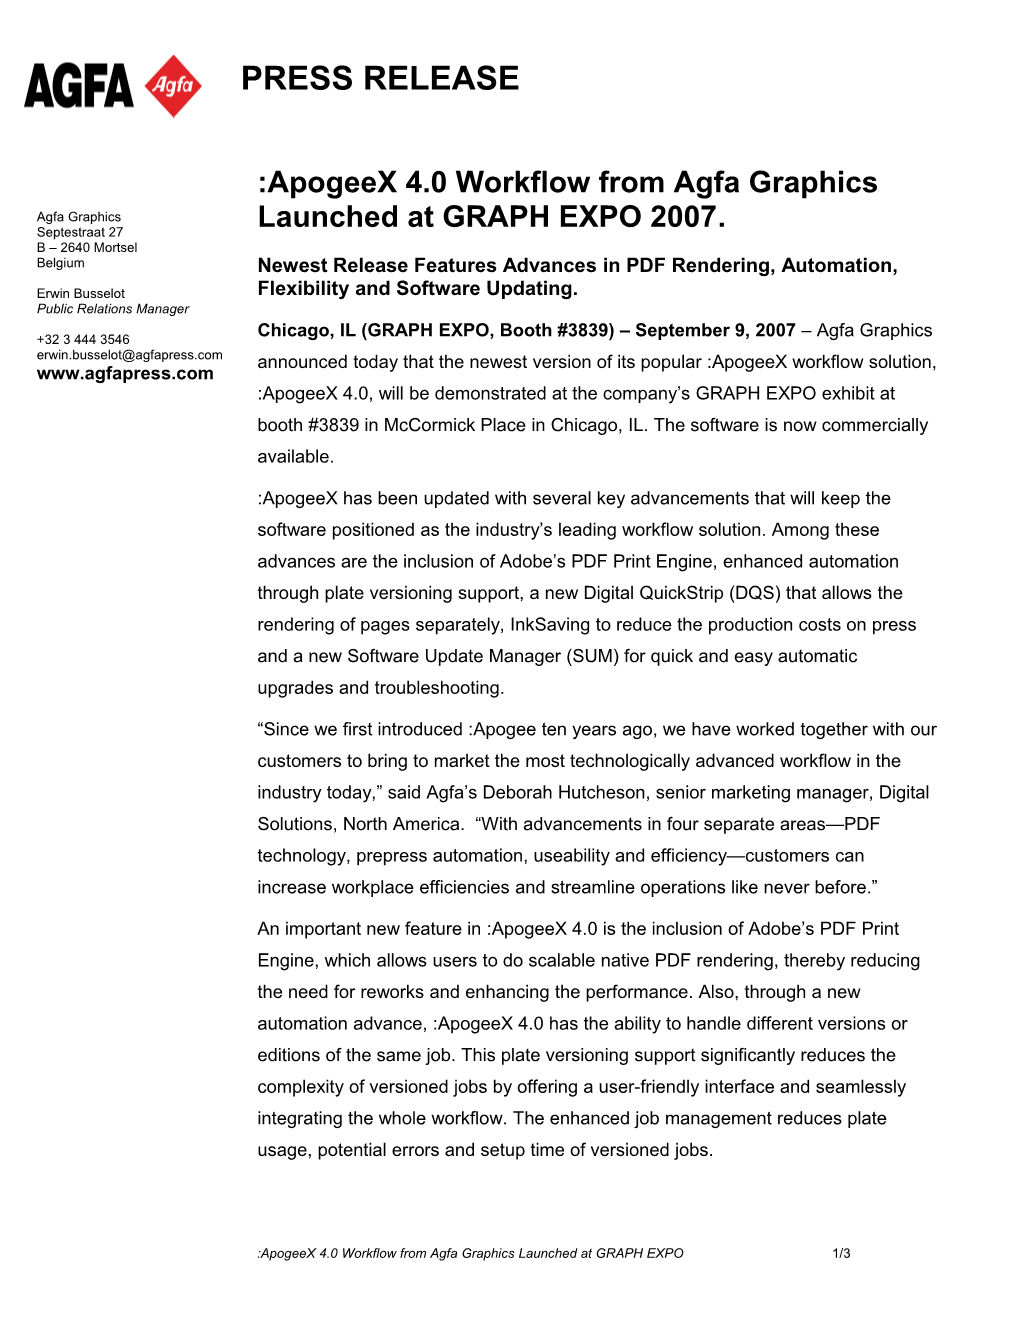 Apogeex 4.0 Workflow from Agfa Graphics Launched at GRAPH EXPO 2007